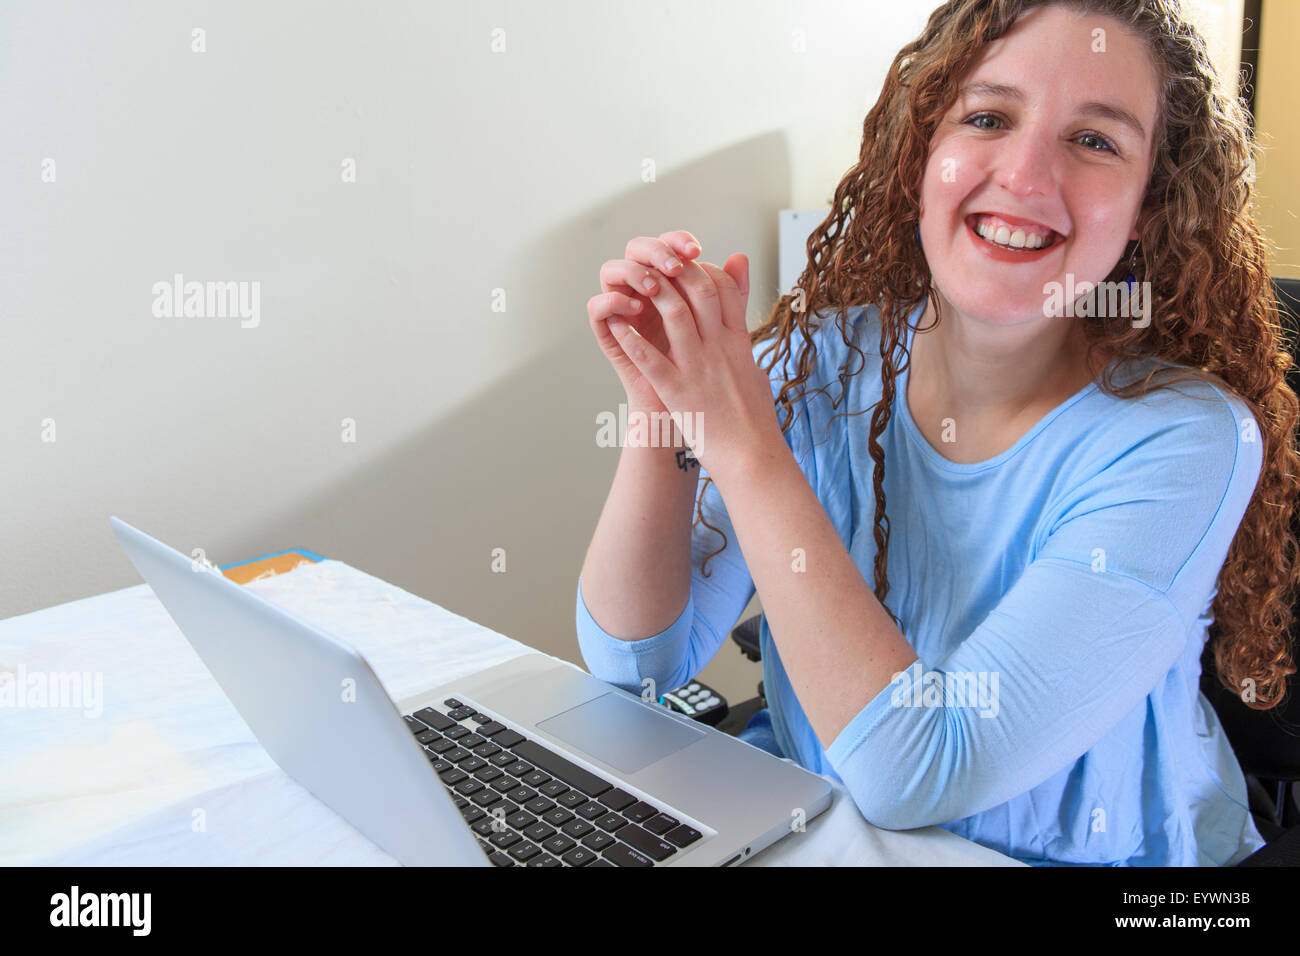 Woman with Muscular Dystrophy working at her laptop in her office Stock Photo